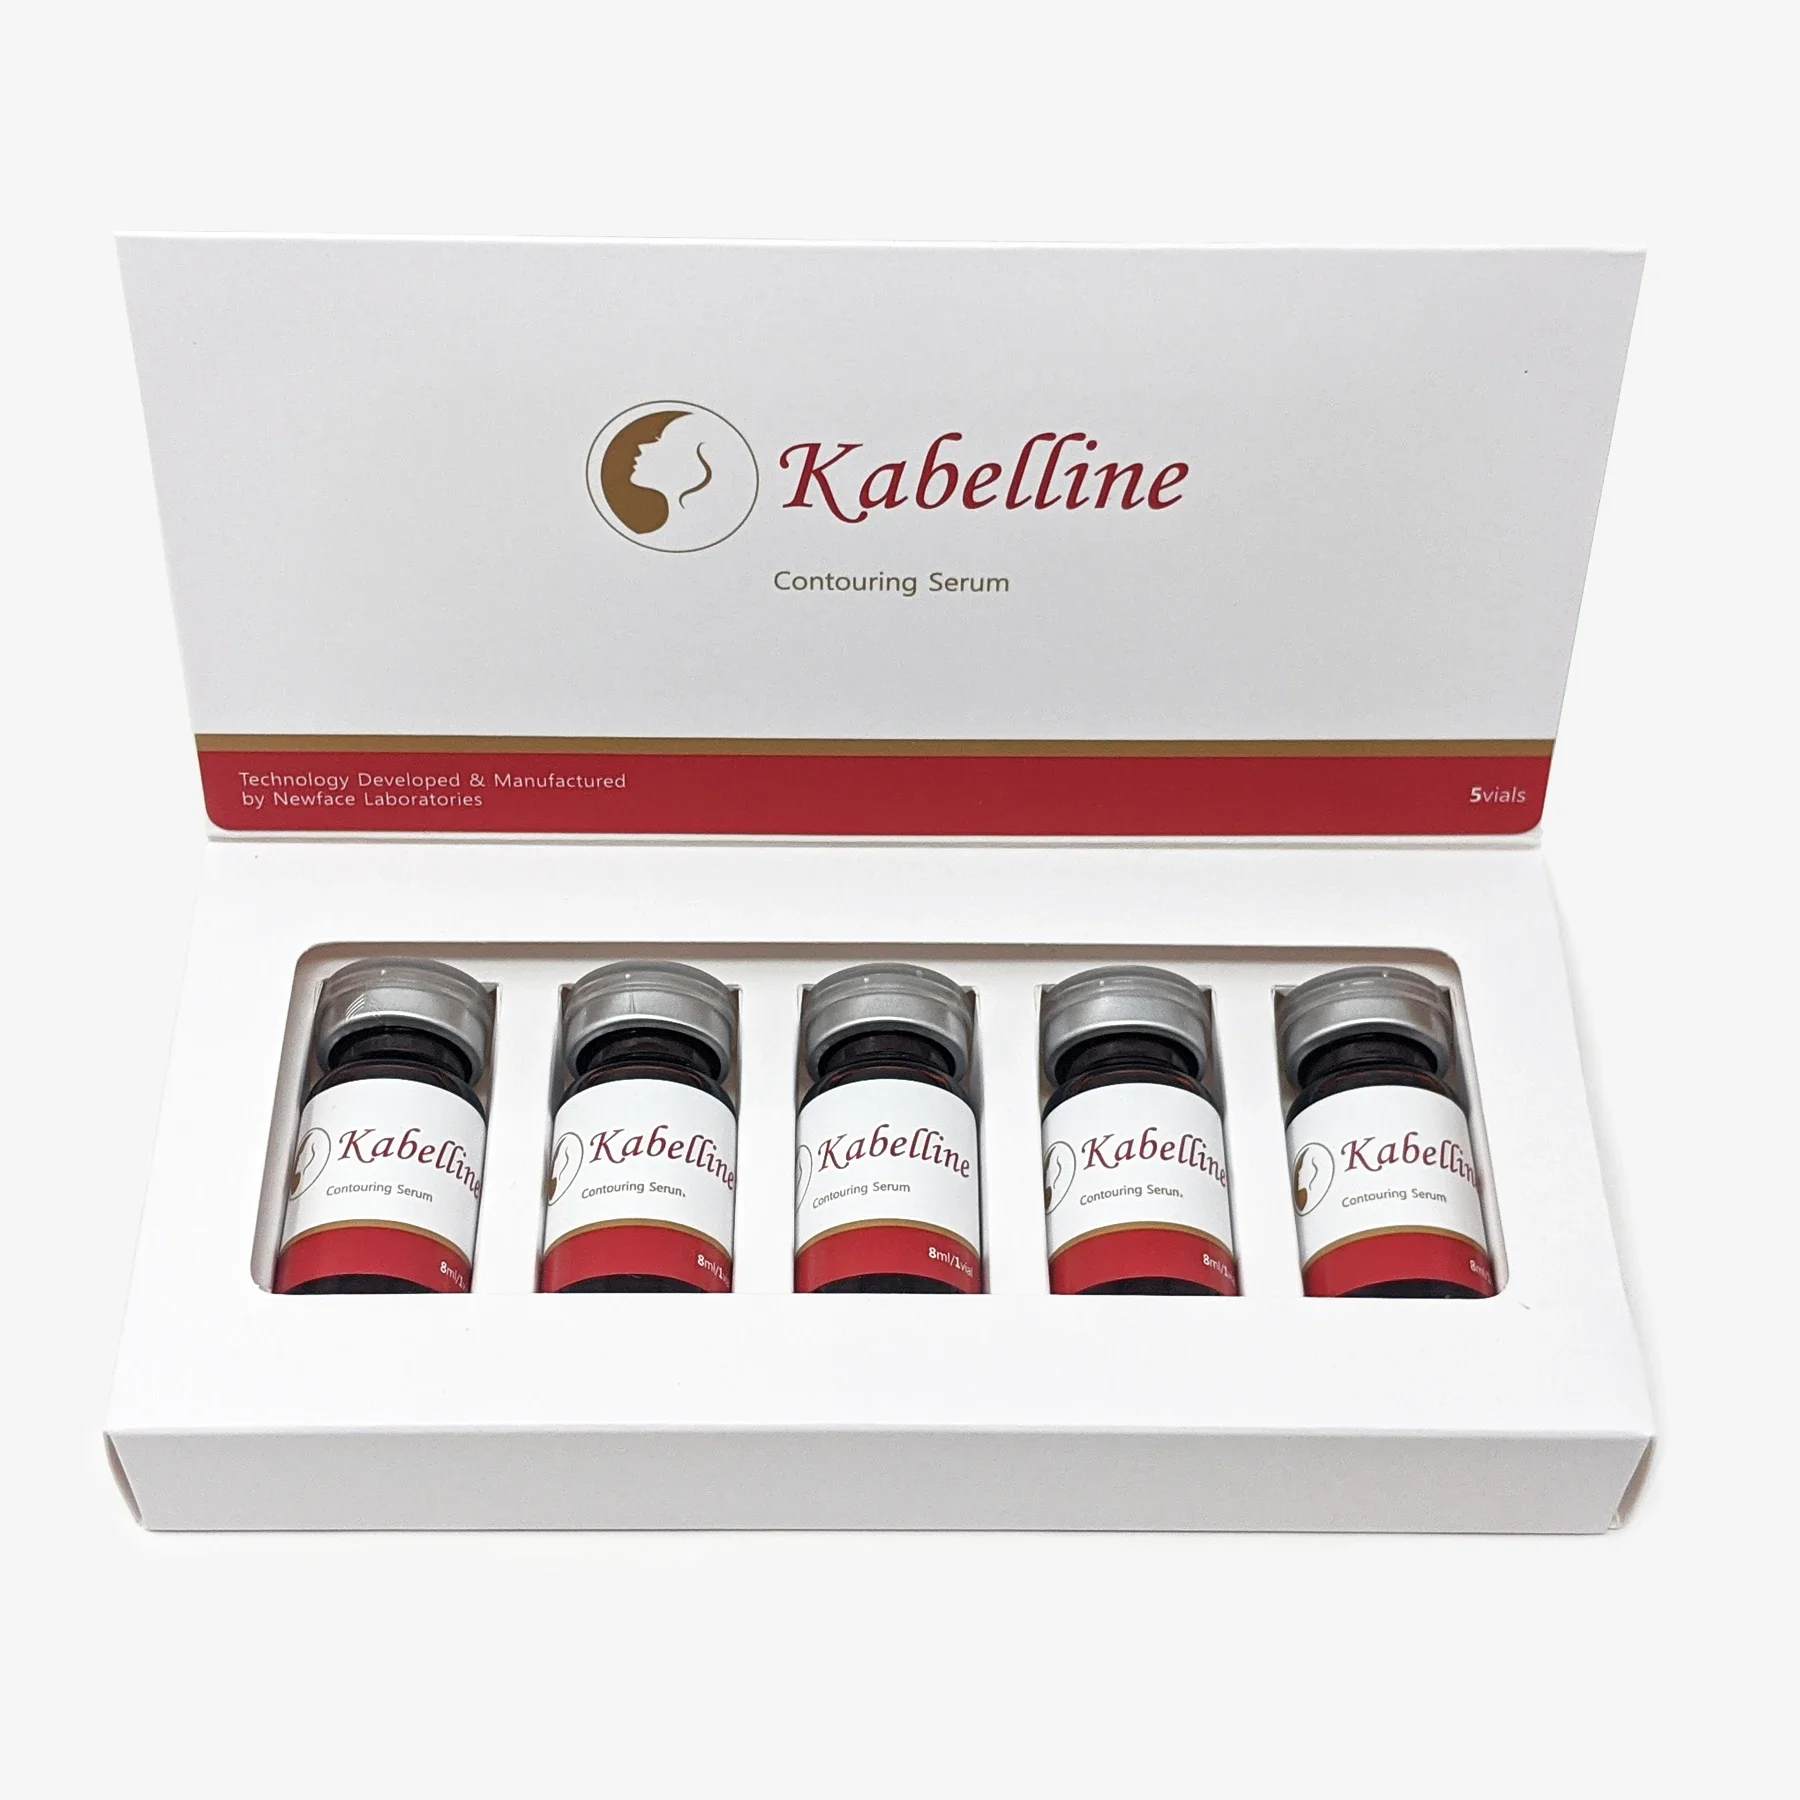 

Kabelline Lipolytic Solution Kybella Deoxycholic acid PPC Injection for Double Chin Face Body Fat Dissolving